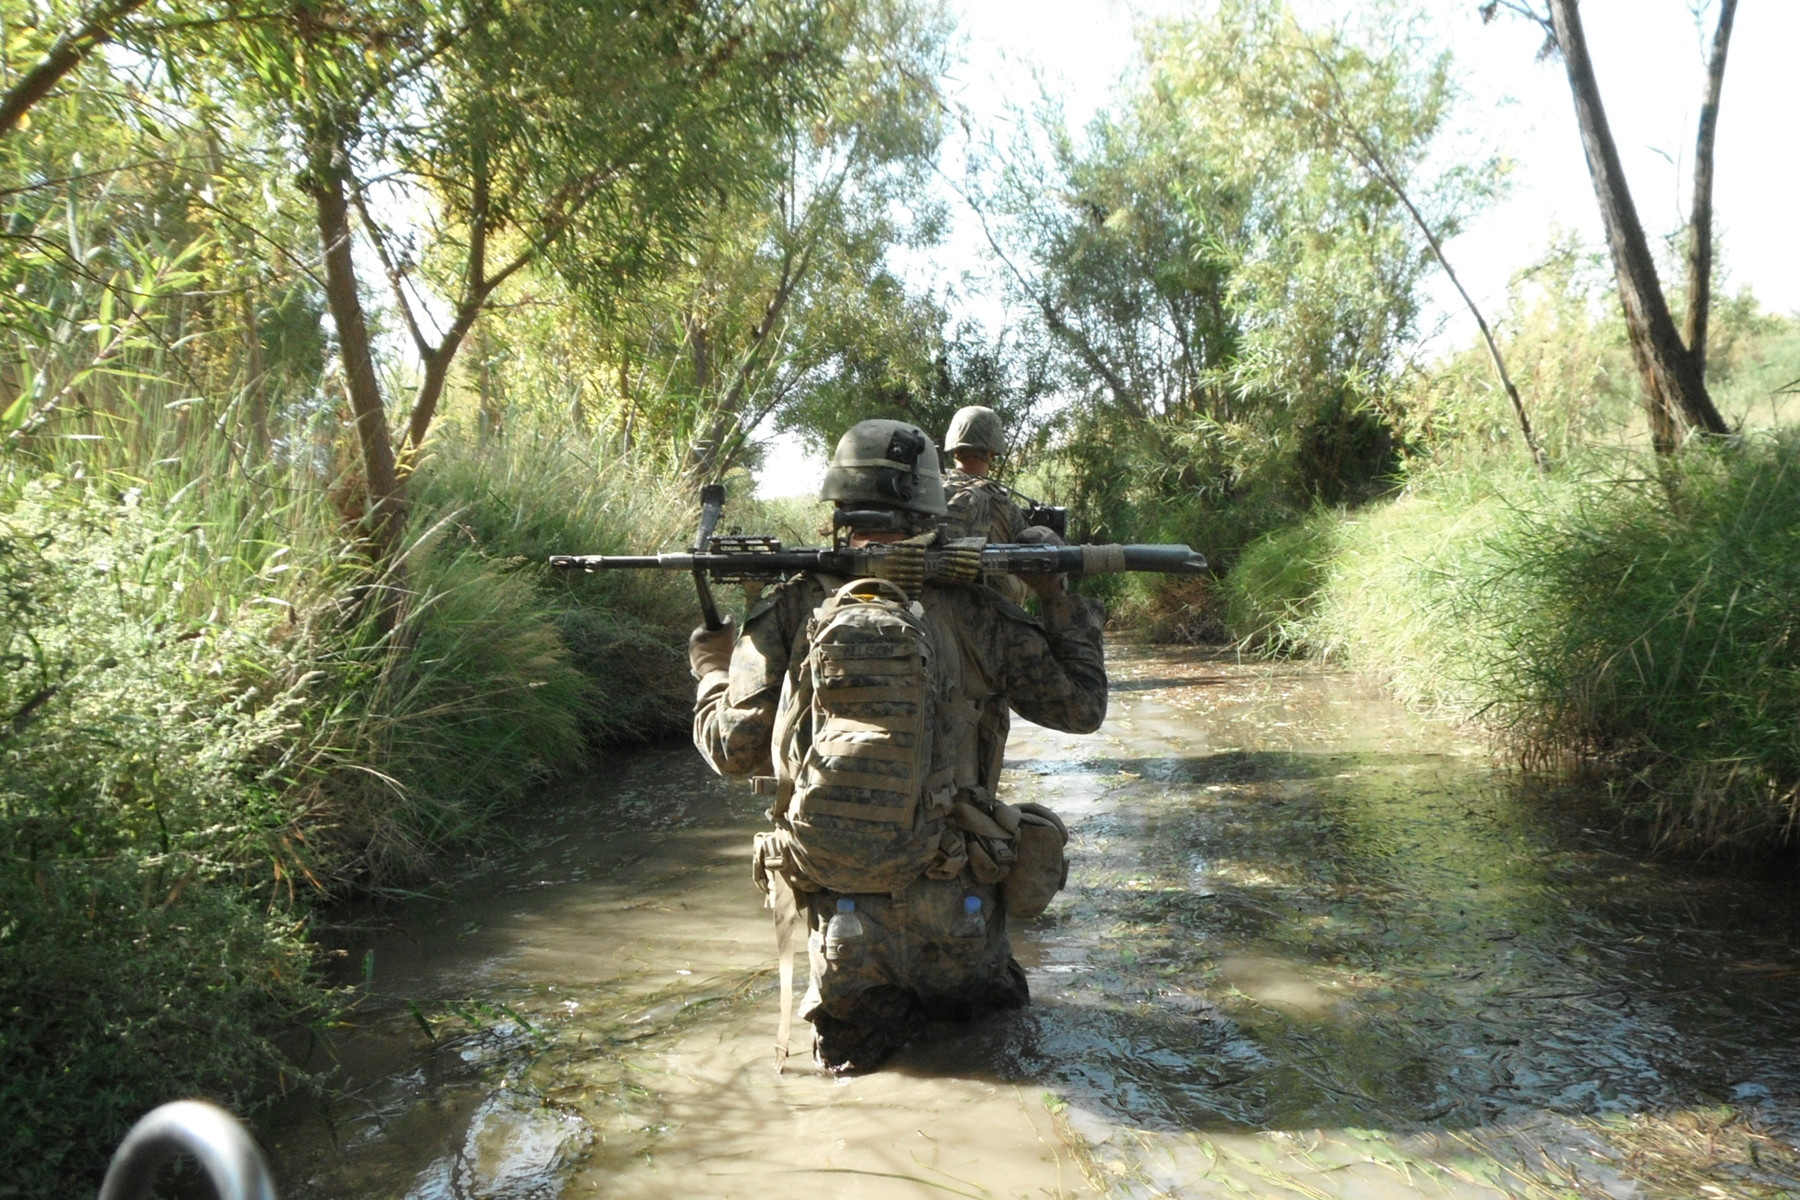 The safest, and least comfortable, route. Kilo Company&#039;s LCpl Casey Allison patrols with 1st Platoon through one of the Northern Green Zone’s ubiquitous canals - the only place sure to be free of IEDs. (Photo courtesy of Seth Folsom.)